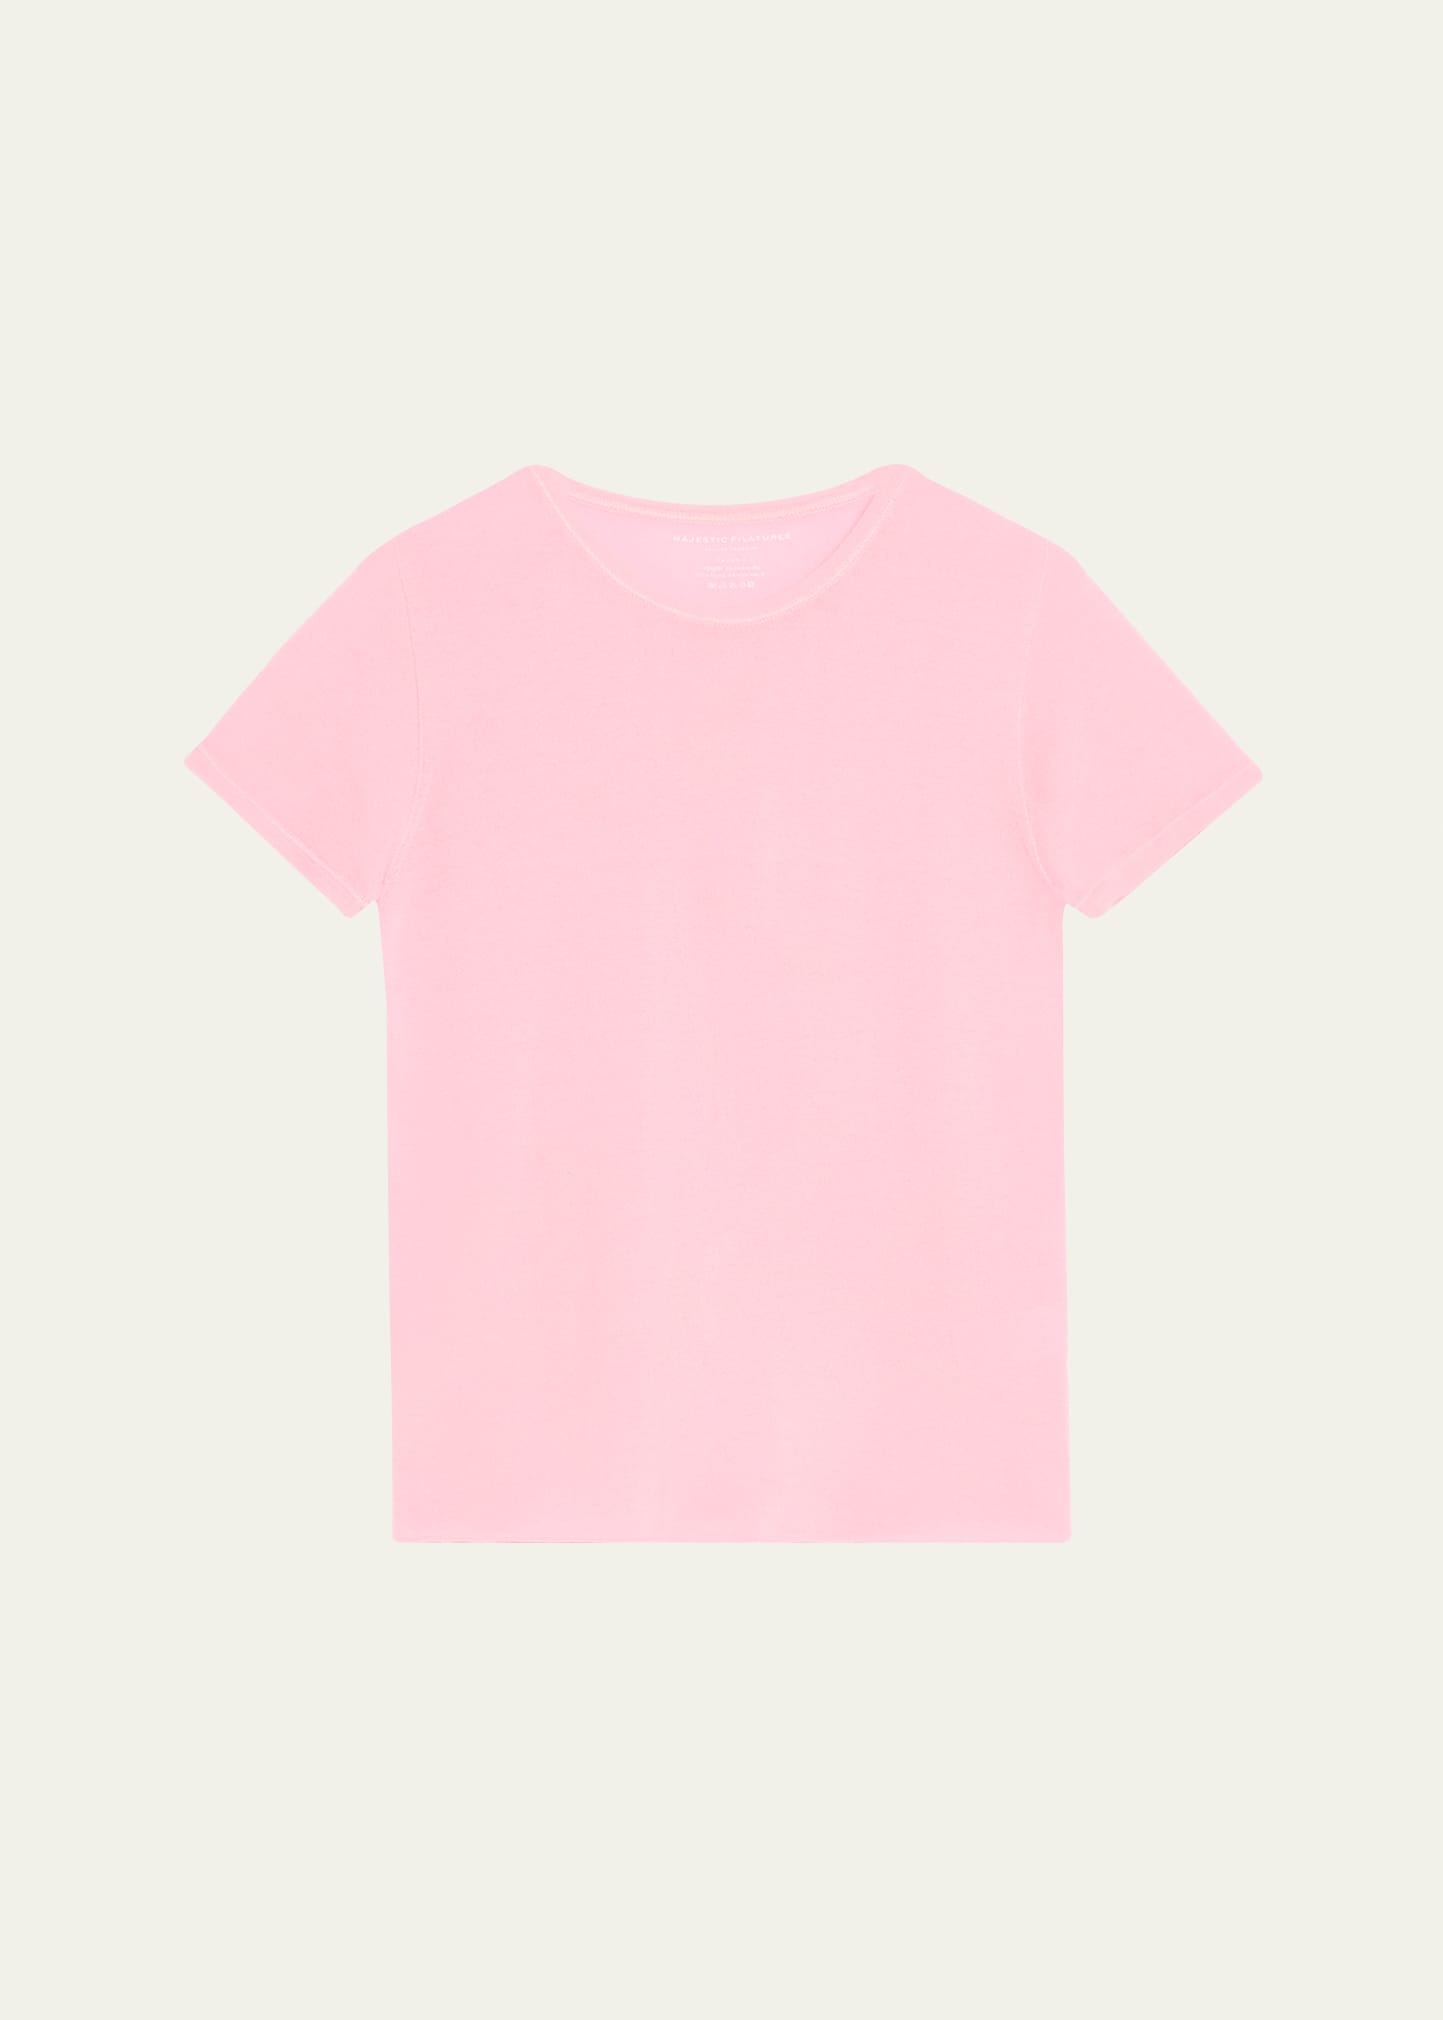 Majestic Cashmere Short-sleeve Crewneck T-shirt In Candy Pink